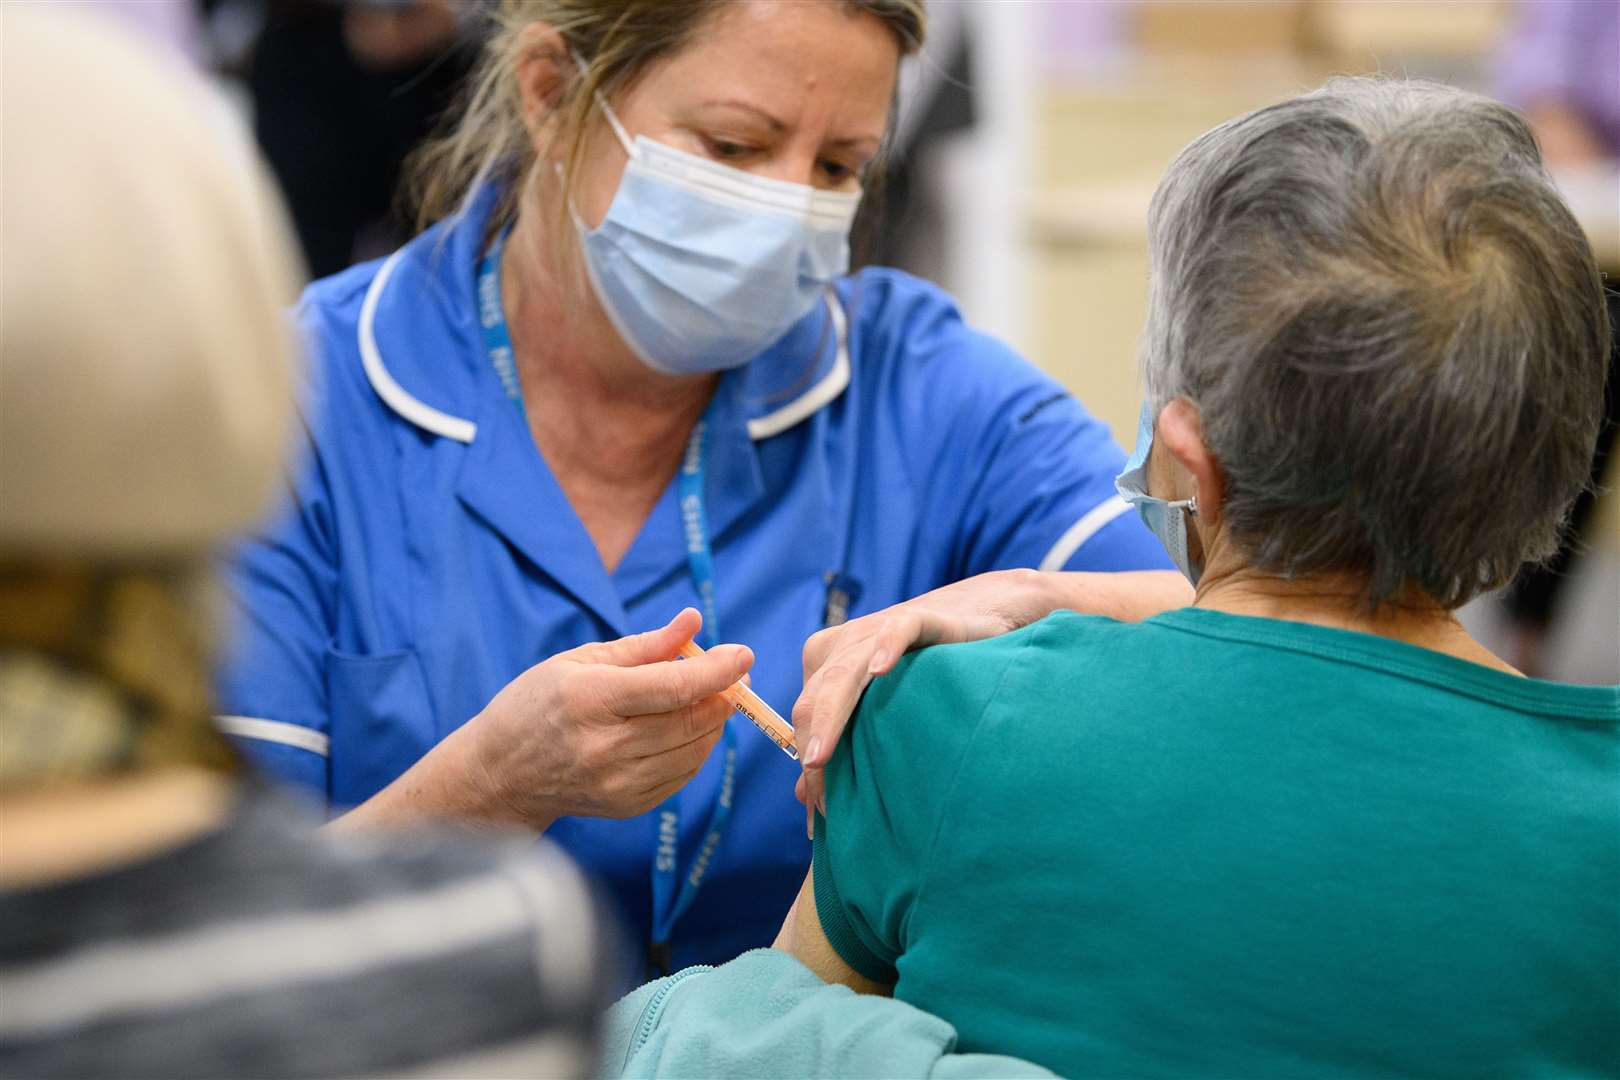 A member of a medical team administers a Covid-19 vaccine injection (PA)